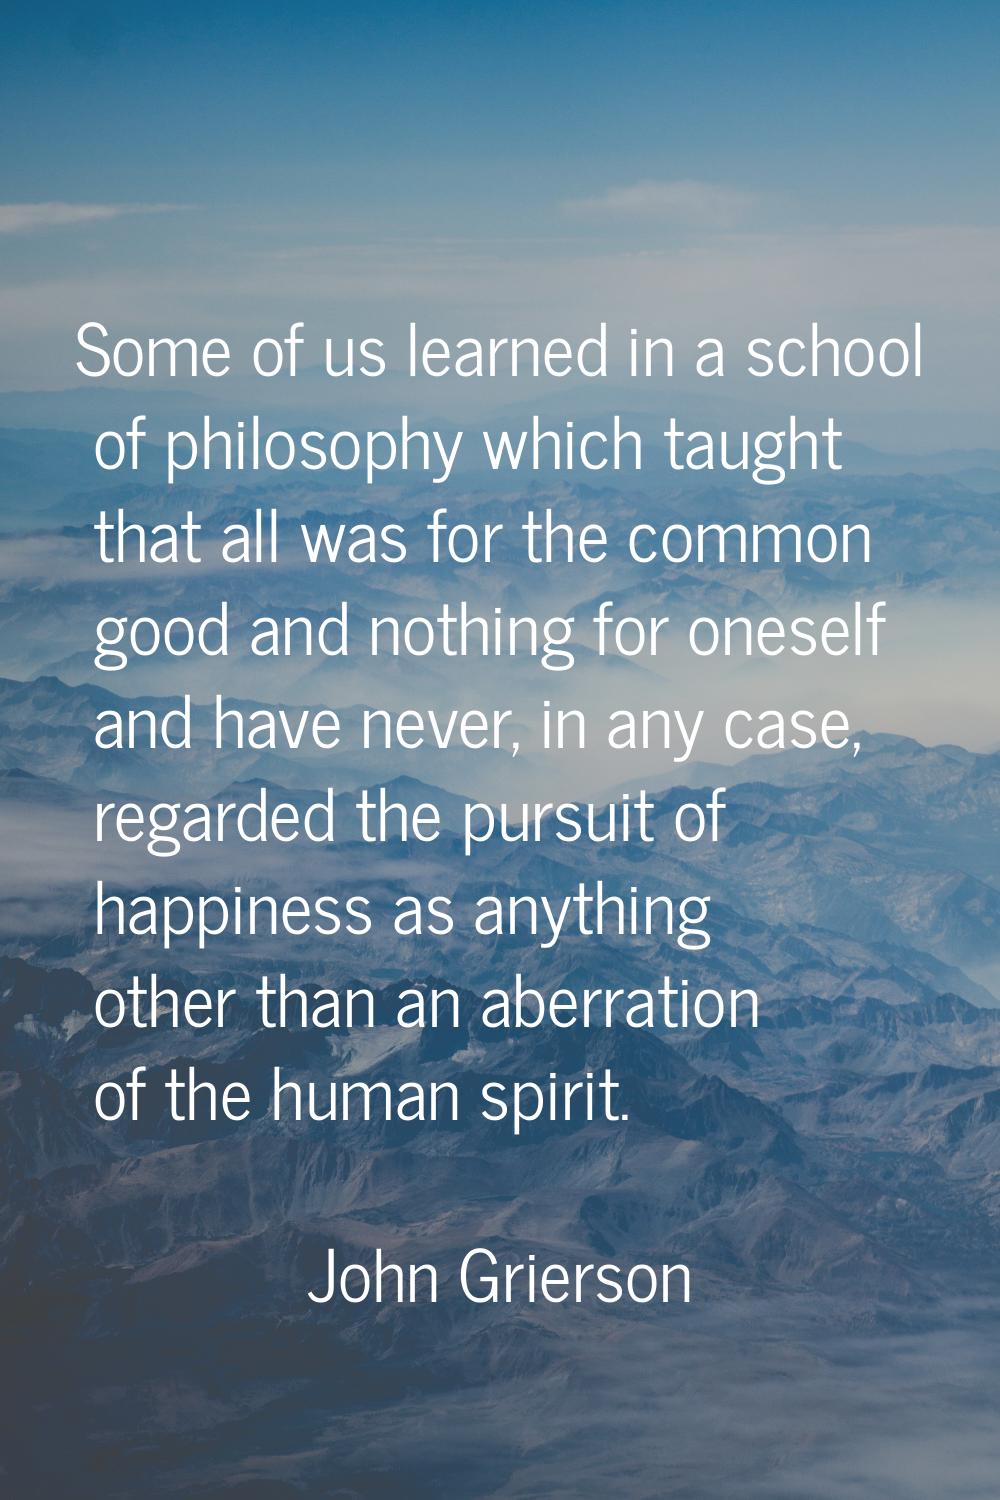 Some of us learned in a school of philosophy which taught that all was for the common good and noth